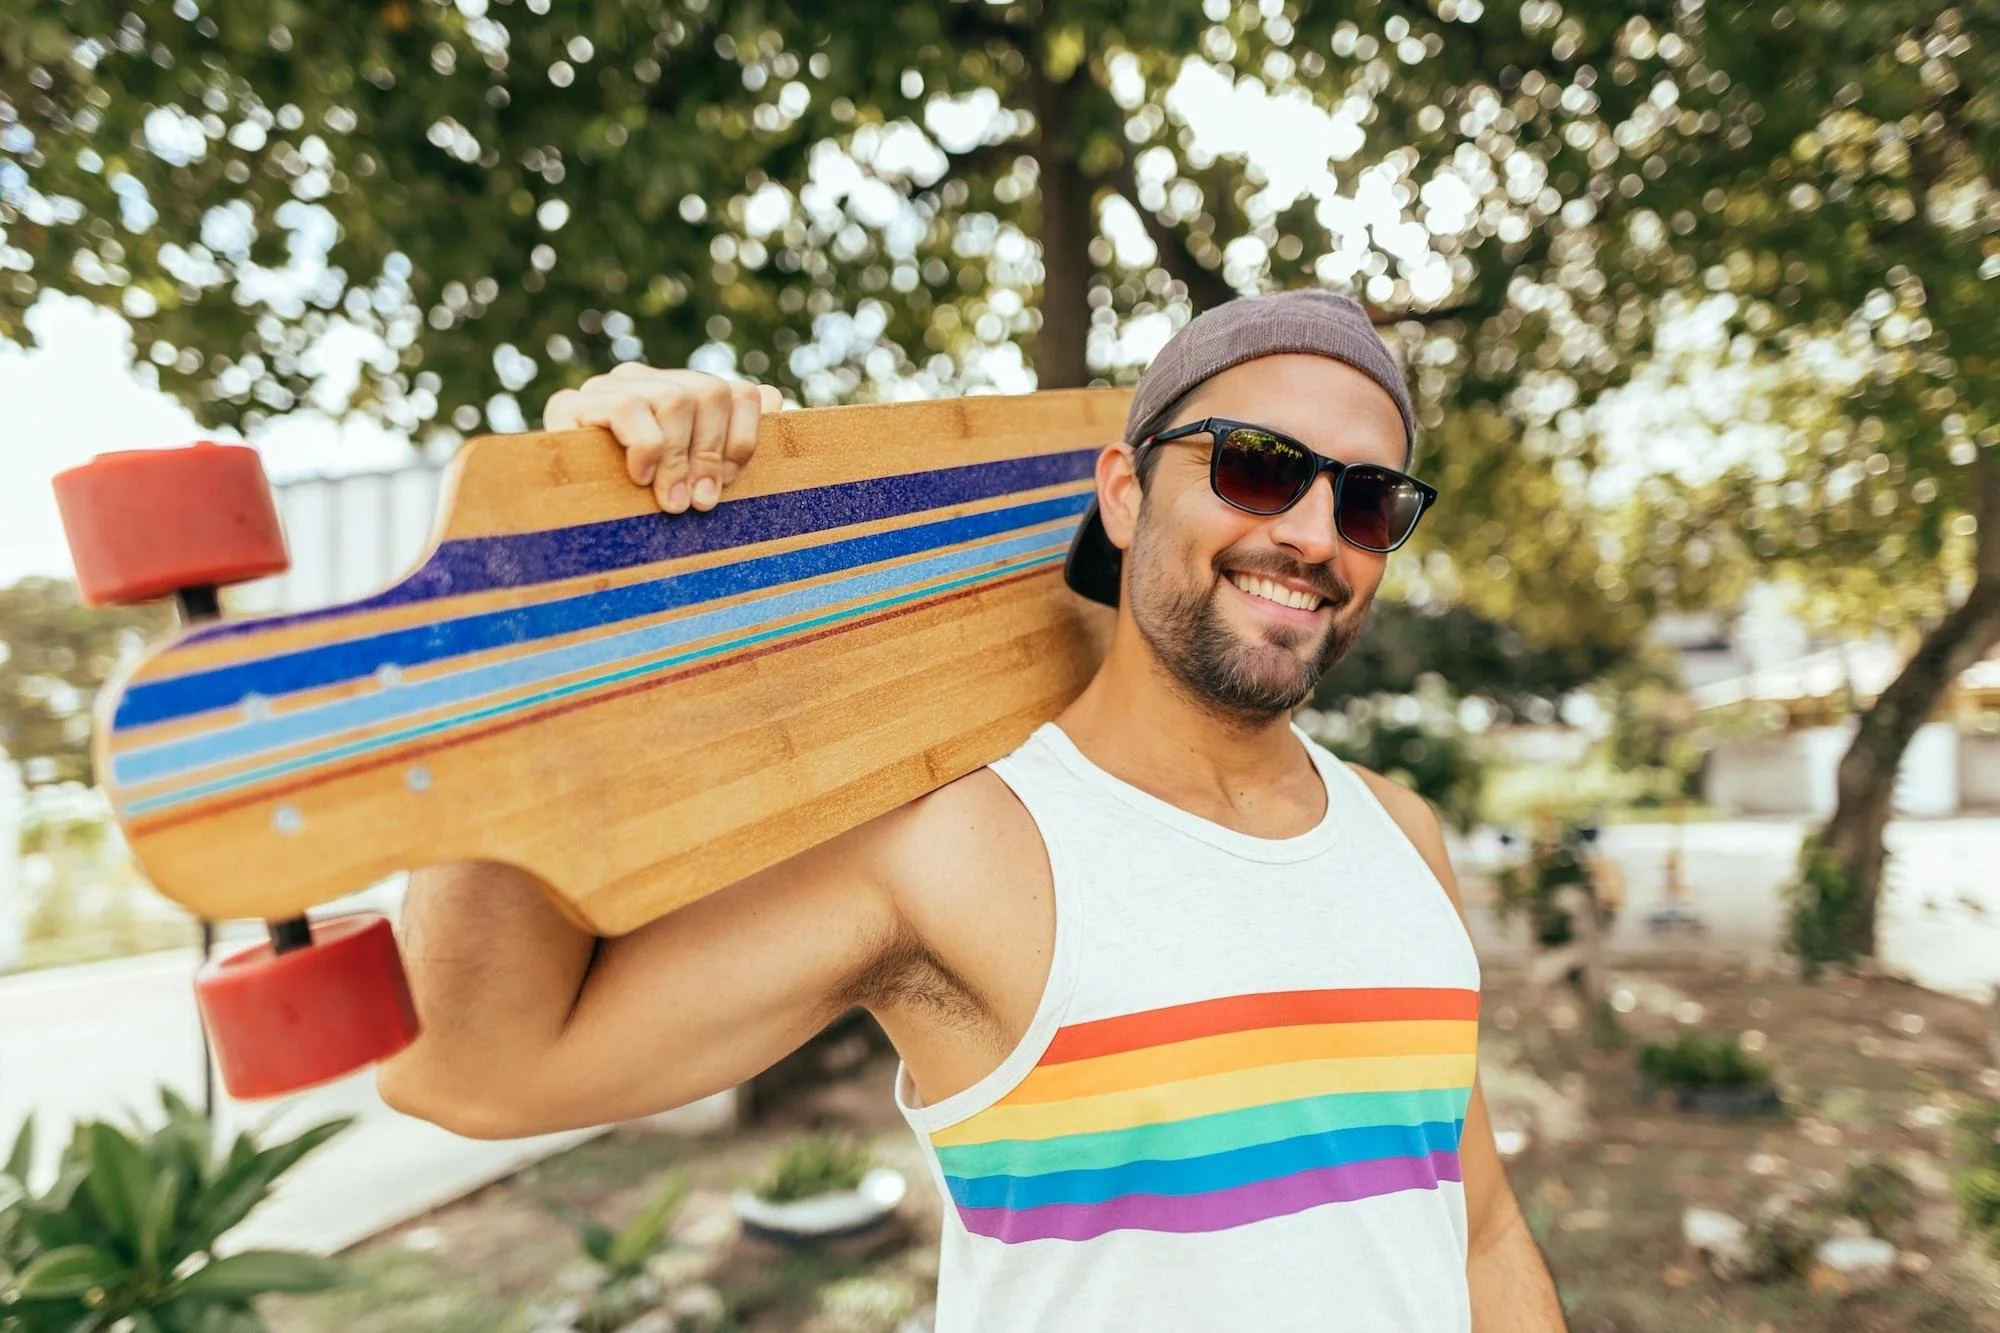 A cheerful man wearing sunglasses and a beanie hat carries a longboard over his shoulder in a park. The face including sunglasses was AI-generated by EraseID.